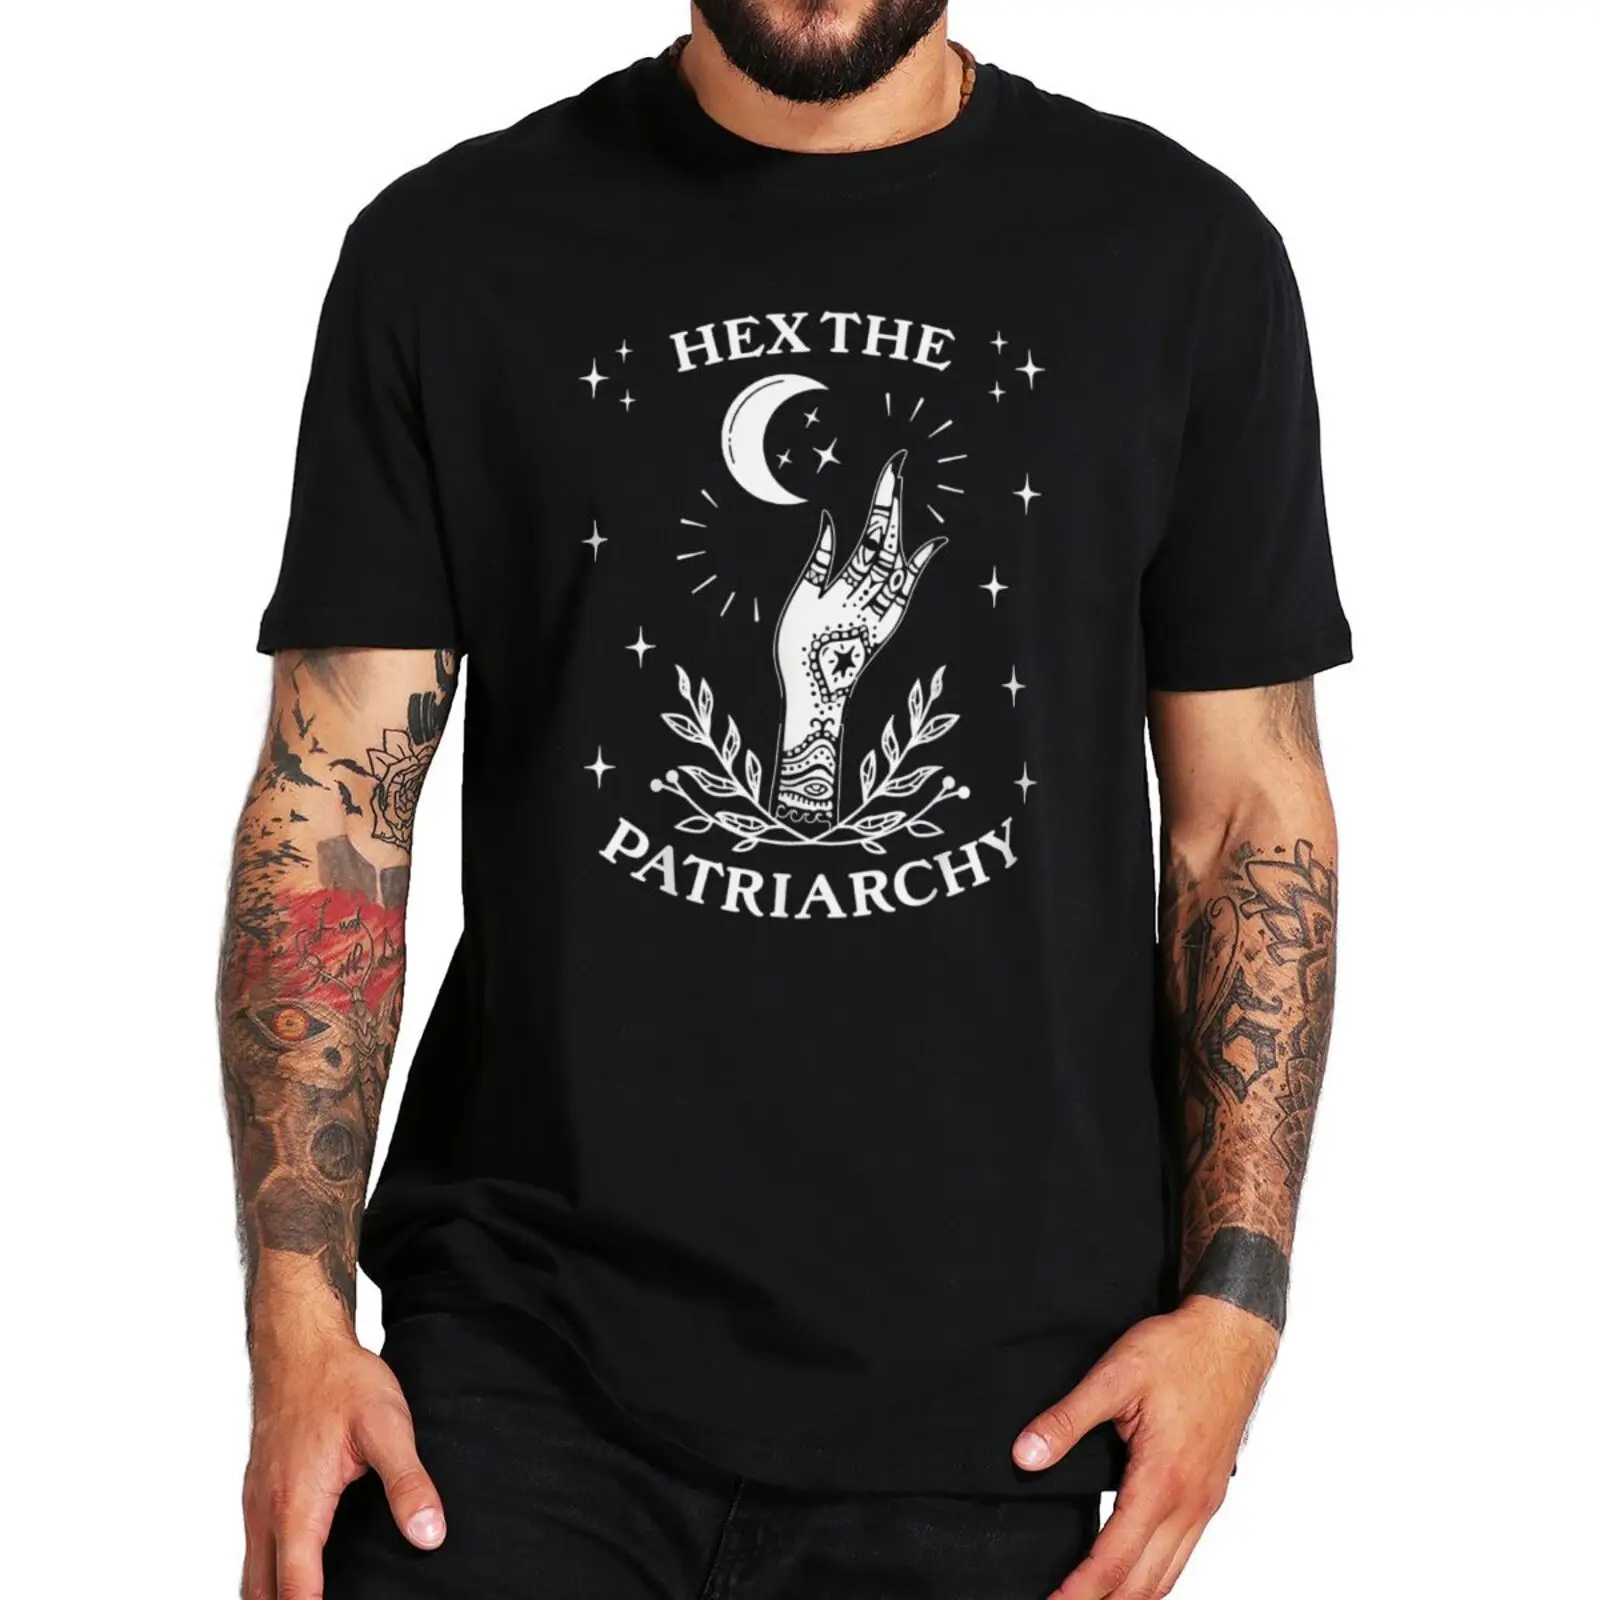 

Hex The Patriarchy T Shirt Feminist Witch Smash The Patriarchy Casual Tshirt For Men Women 100% Cotton Soft T-Shirts